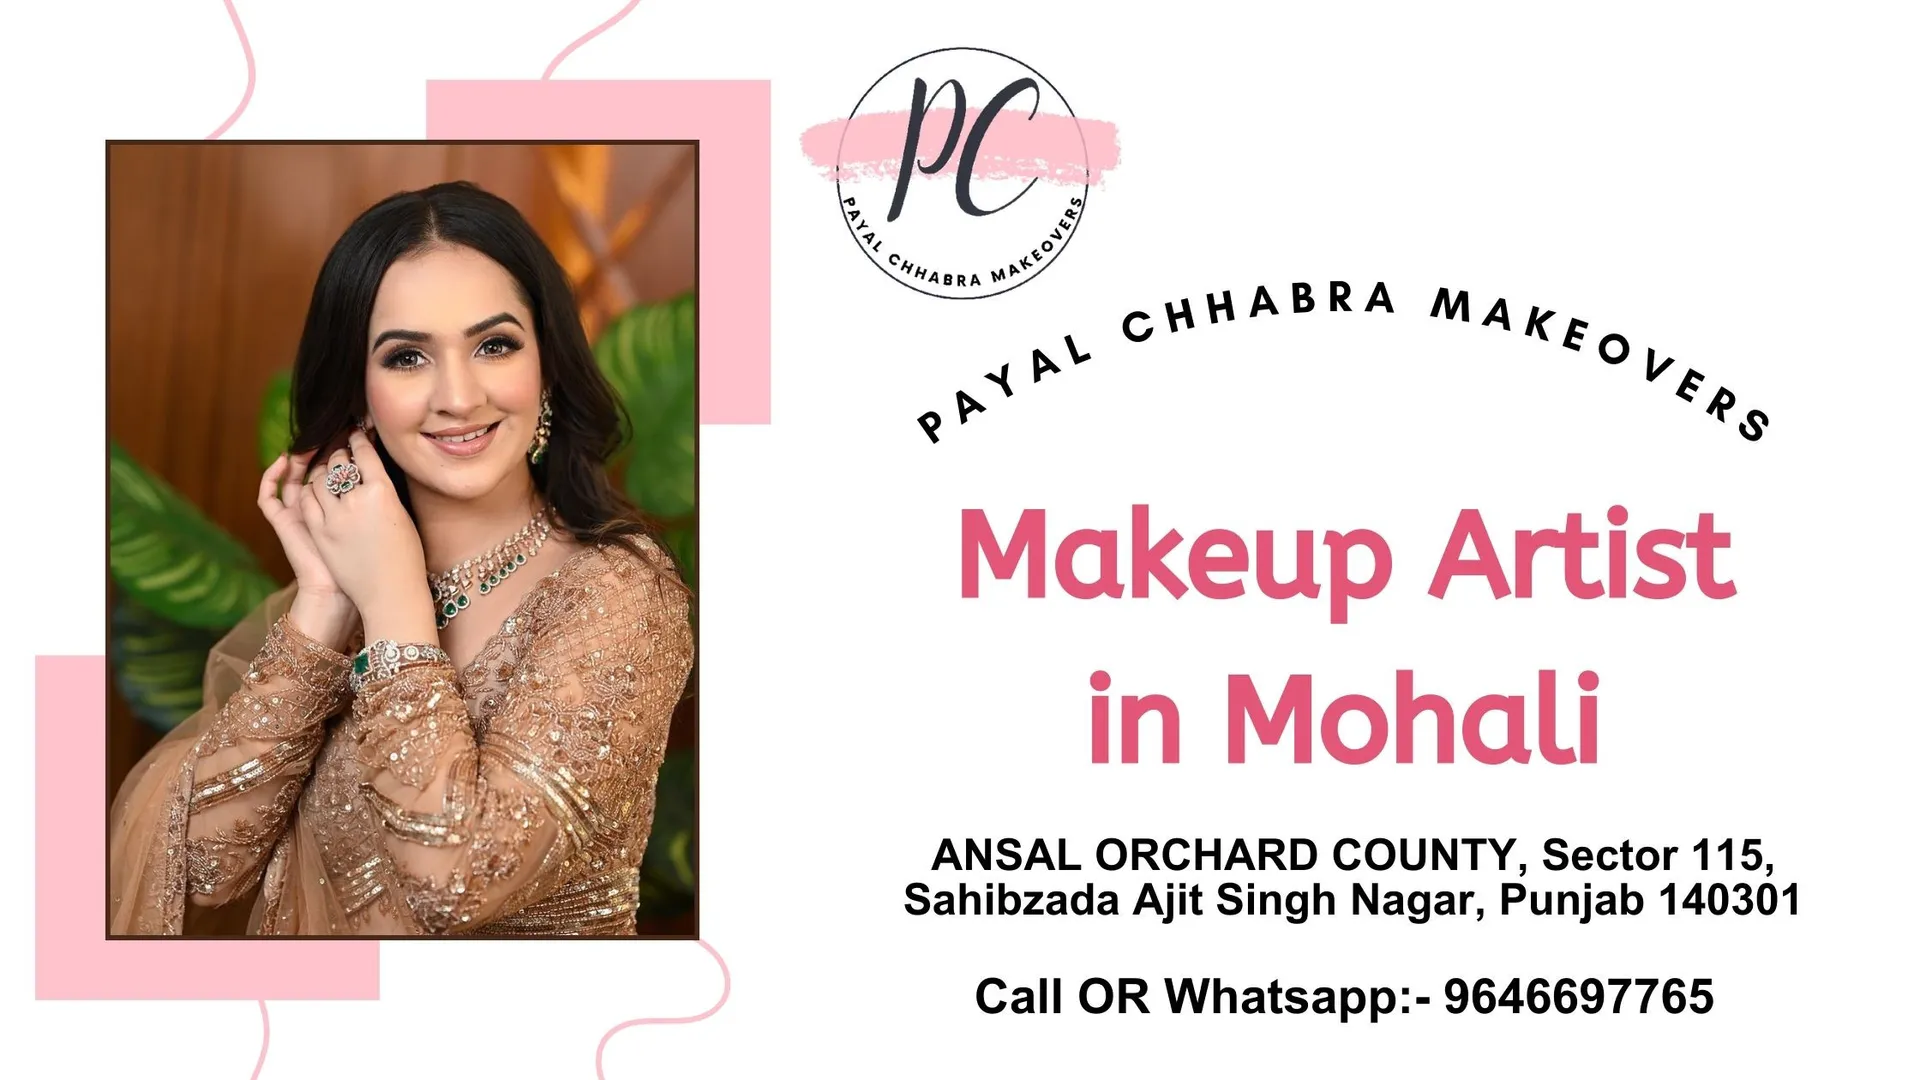 Experience the magic of transformation with Payal Chhabra, the most sought-after makeup artist in Mohali. With a blend of artistry and expertise, Payal Chhabra crafts mesmerizing makeovers that accentuate your natural beauty.

As a leading makeup artist, Payal understands the individuality of each client and tailors her creations to enhance their unique features and style. visit now for more details. https://g.co/kgs/7eMr4B